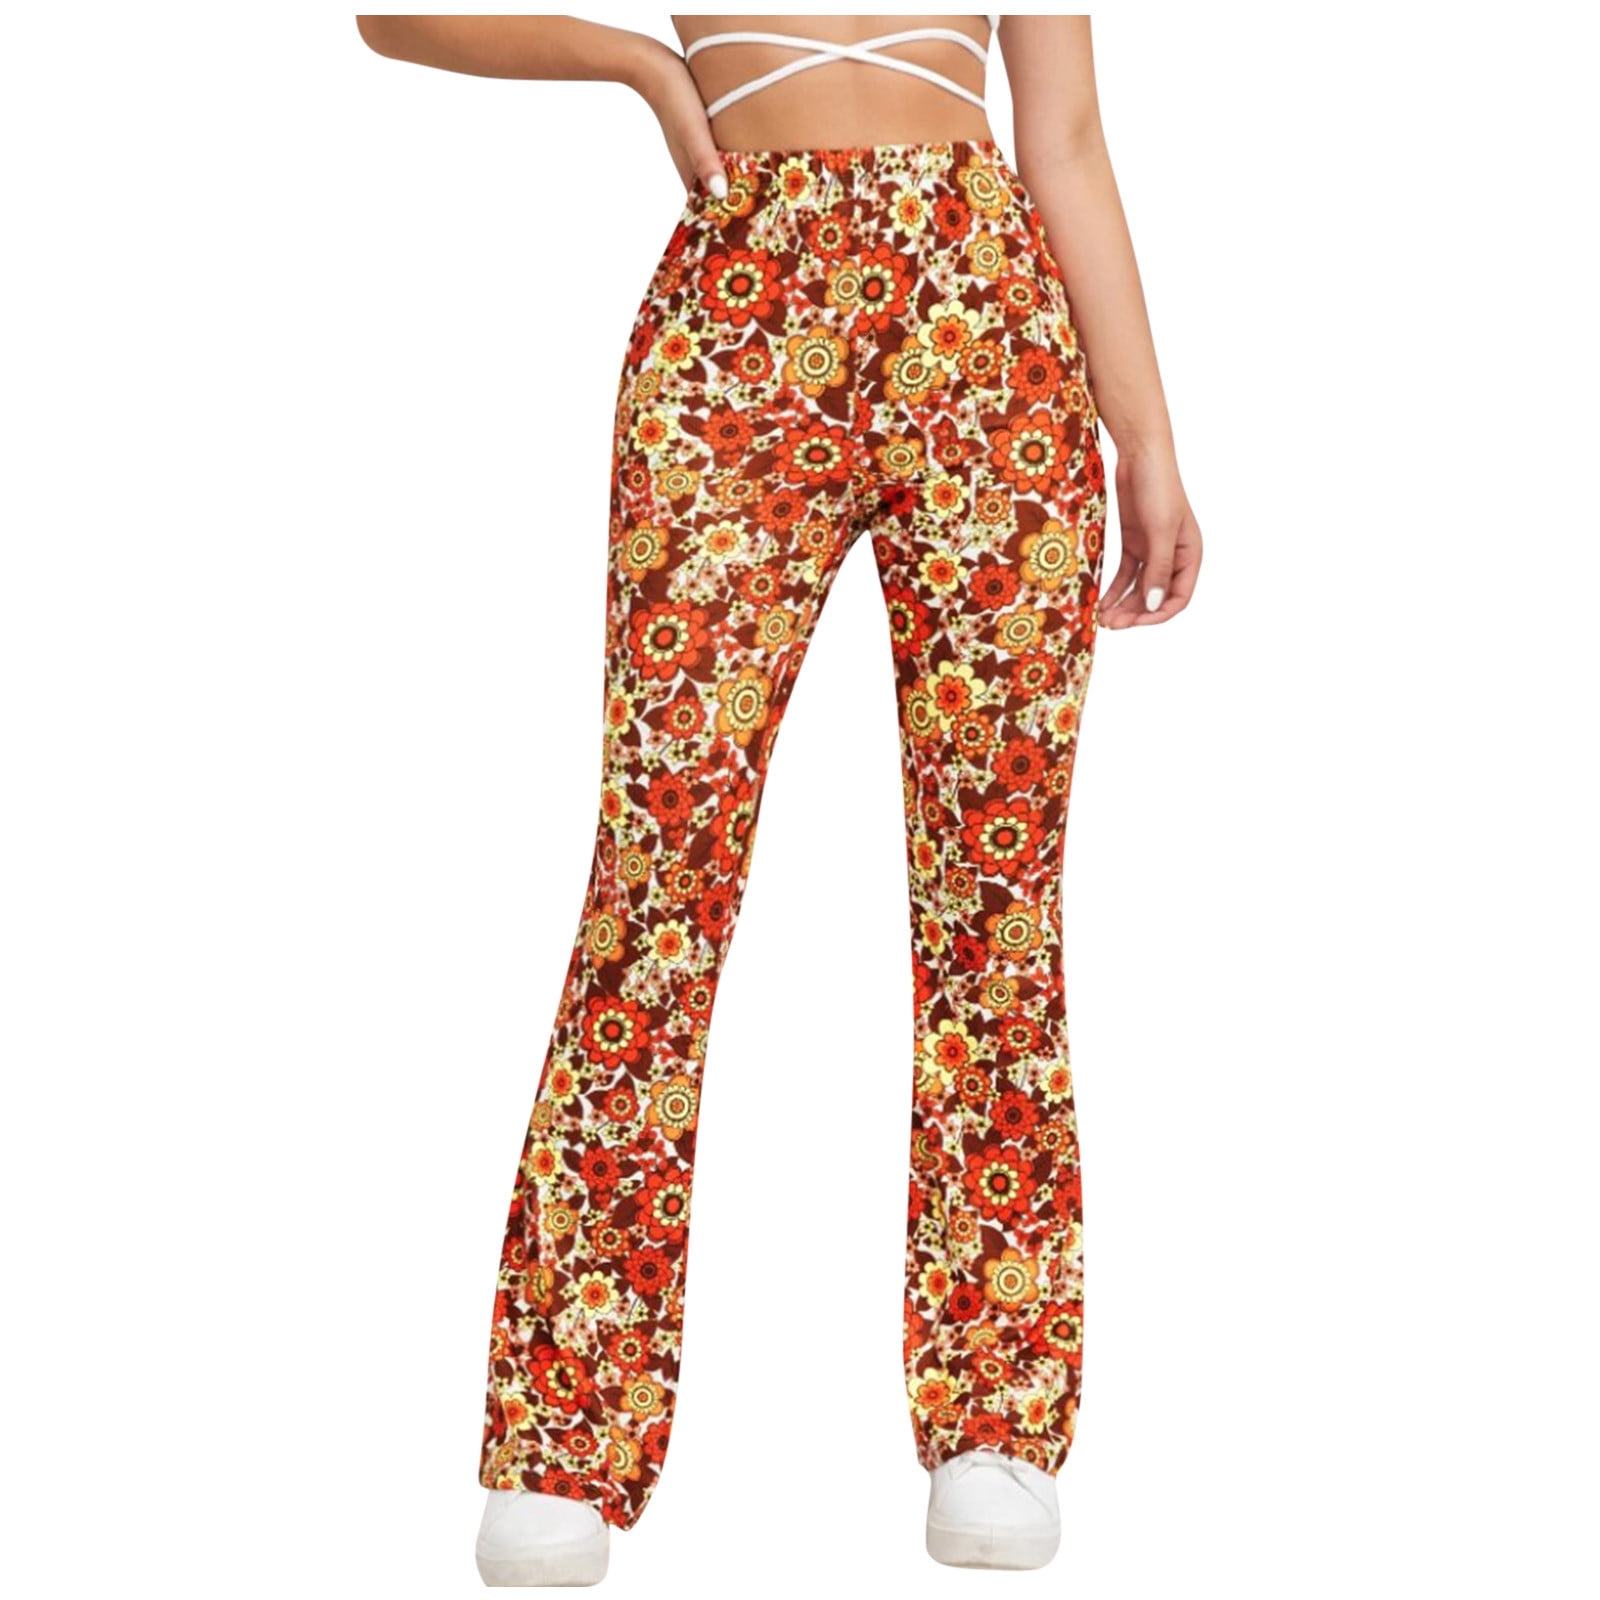 Women Bootcut Yoga Pants Printed High Waisted Stretchy Wide Leg